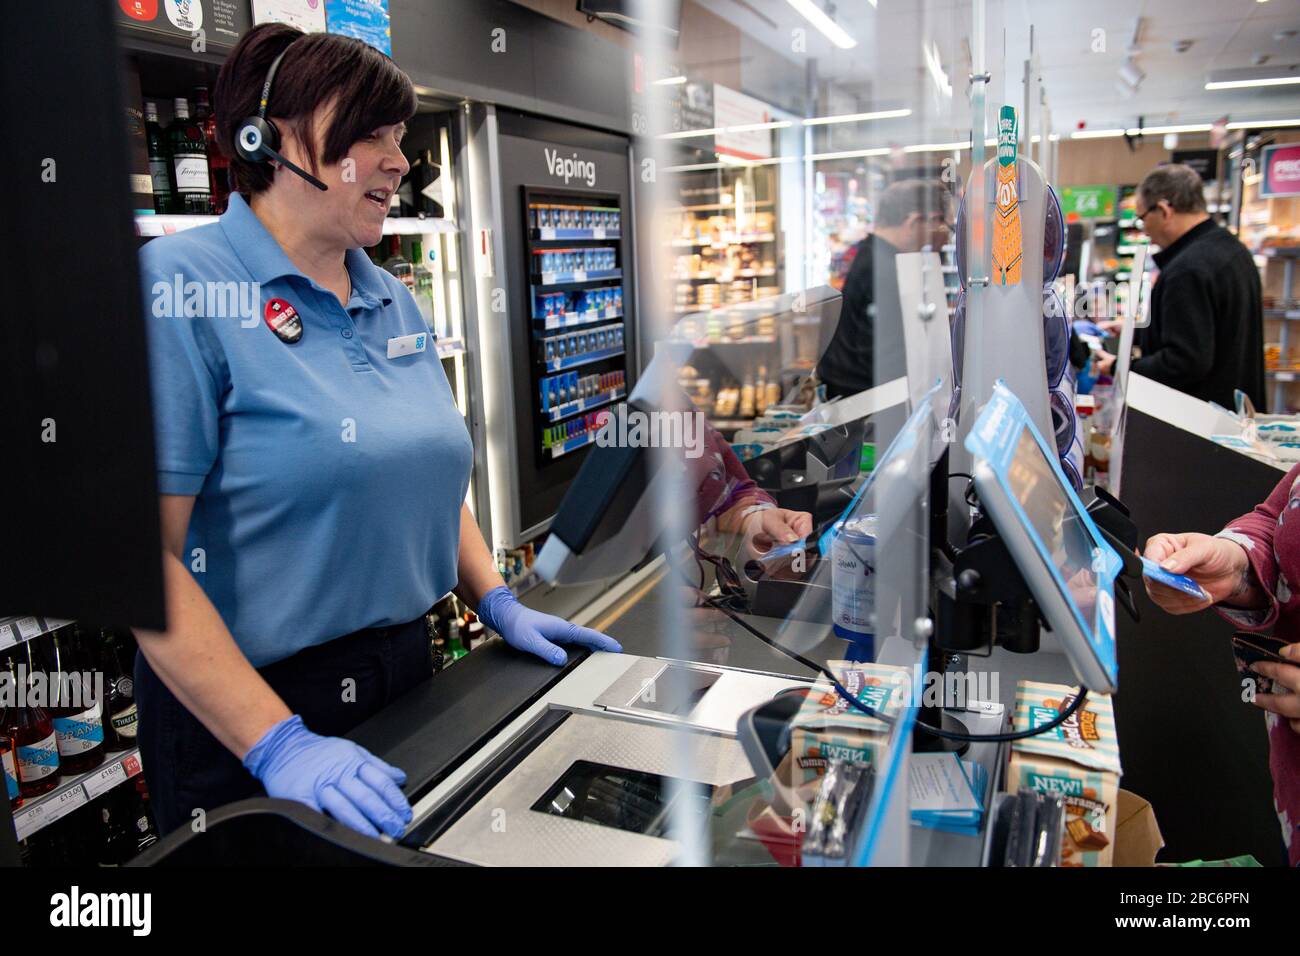 A clear screen divides employees and customers at a Co-op shop in Bromsgrove, Worcestershire. Stock Photo